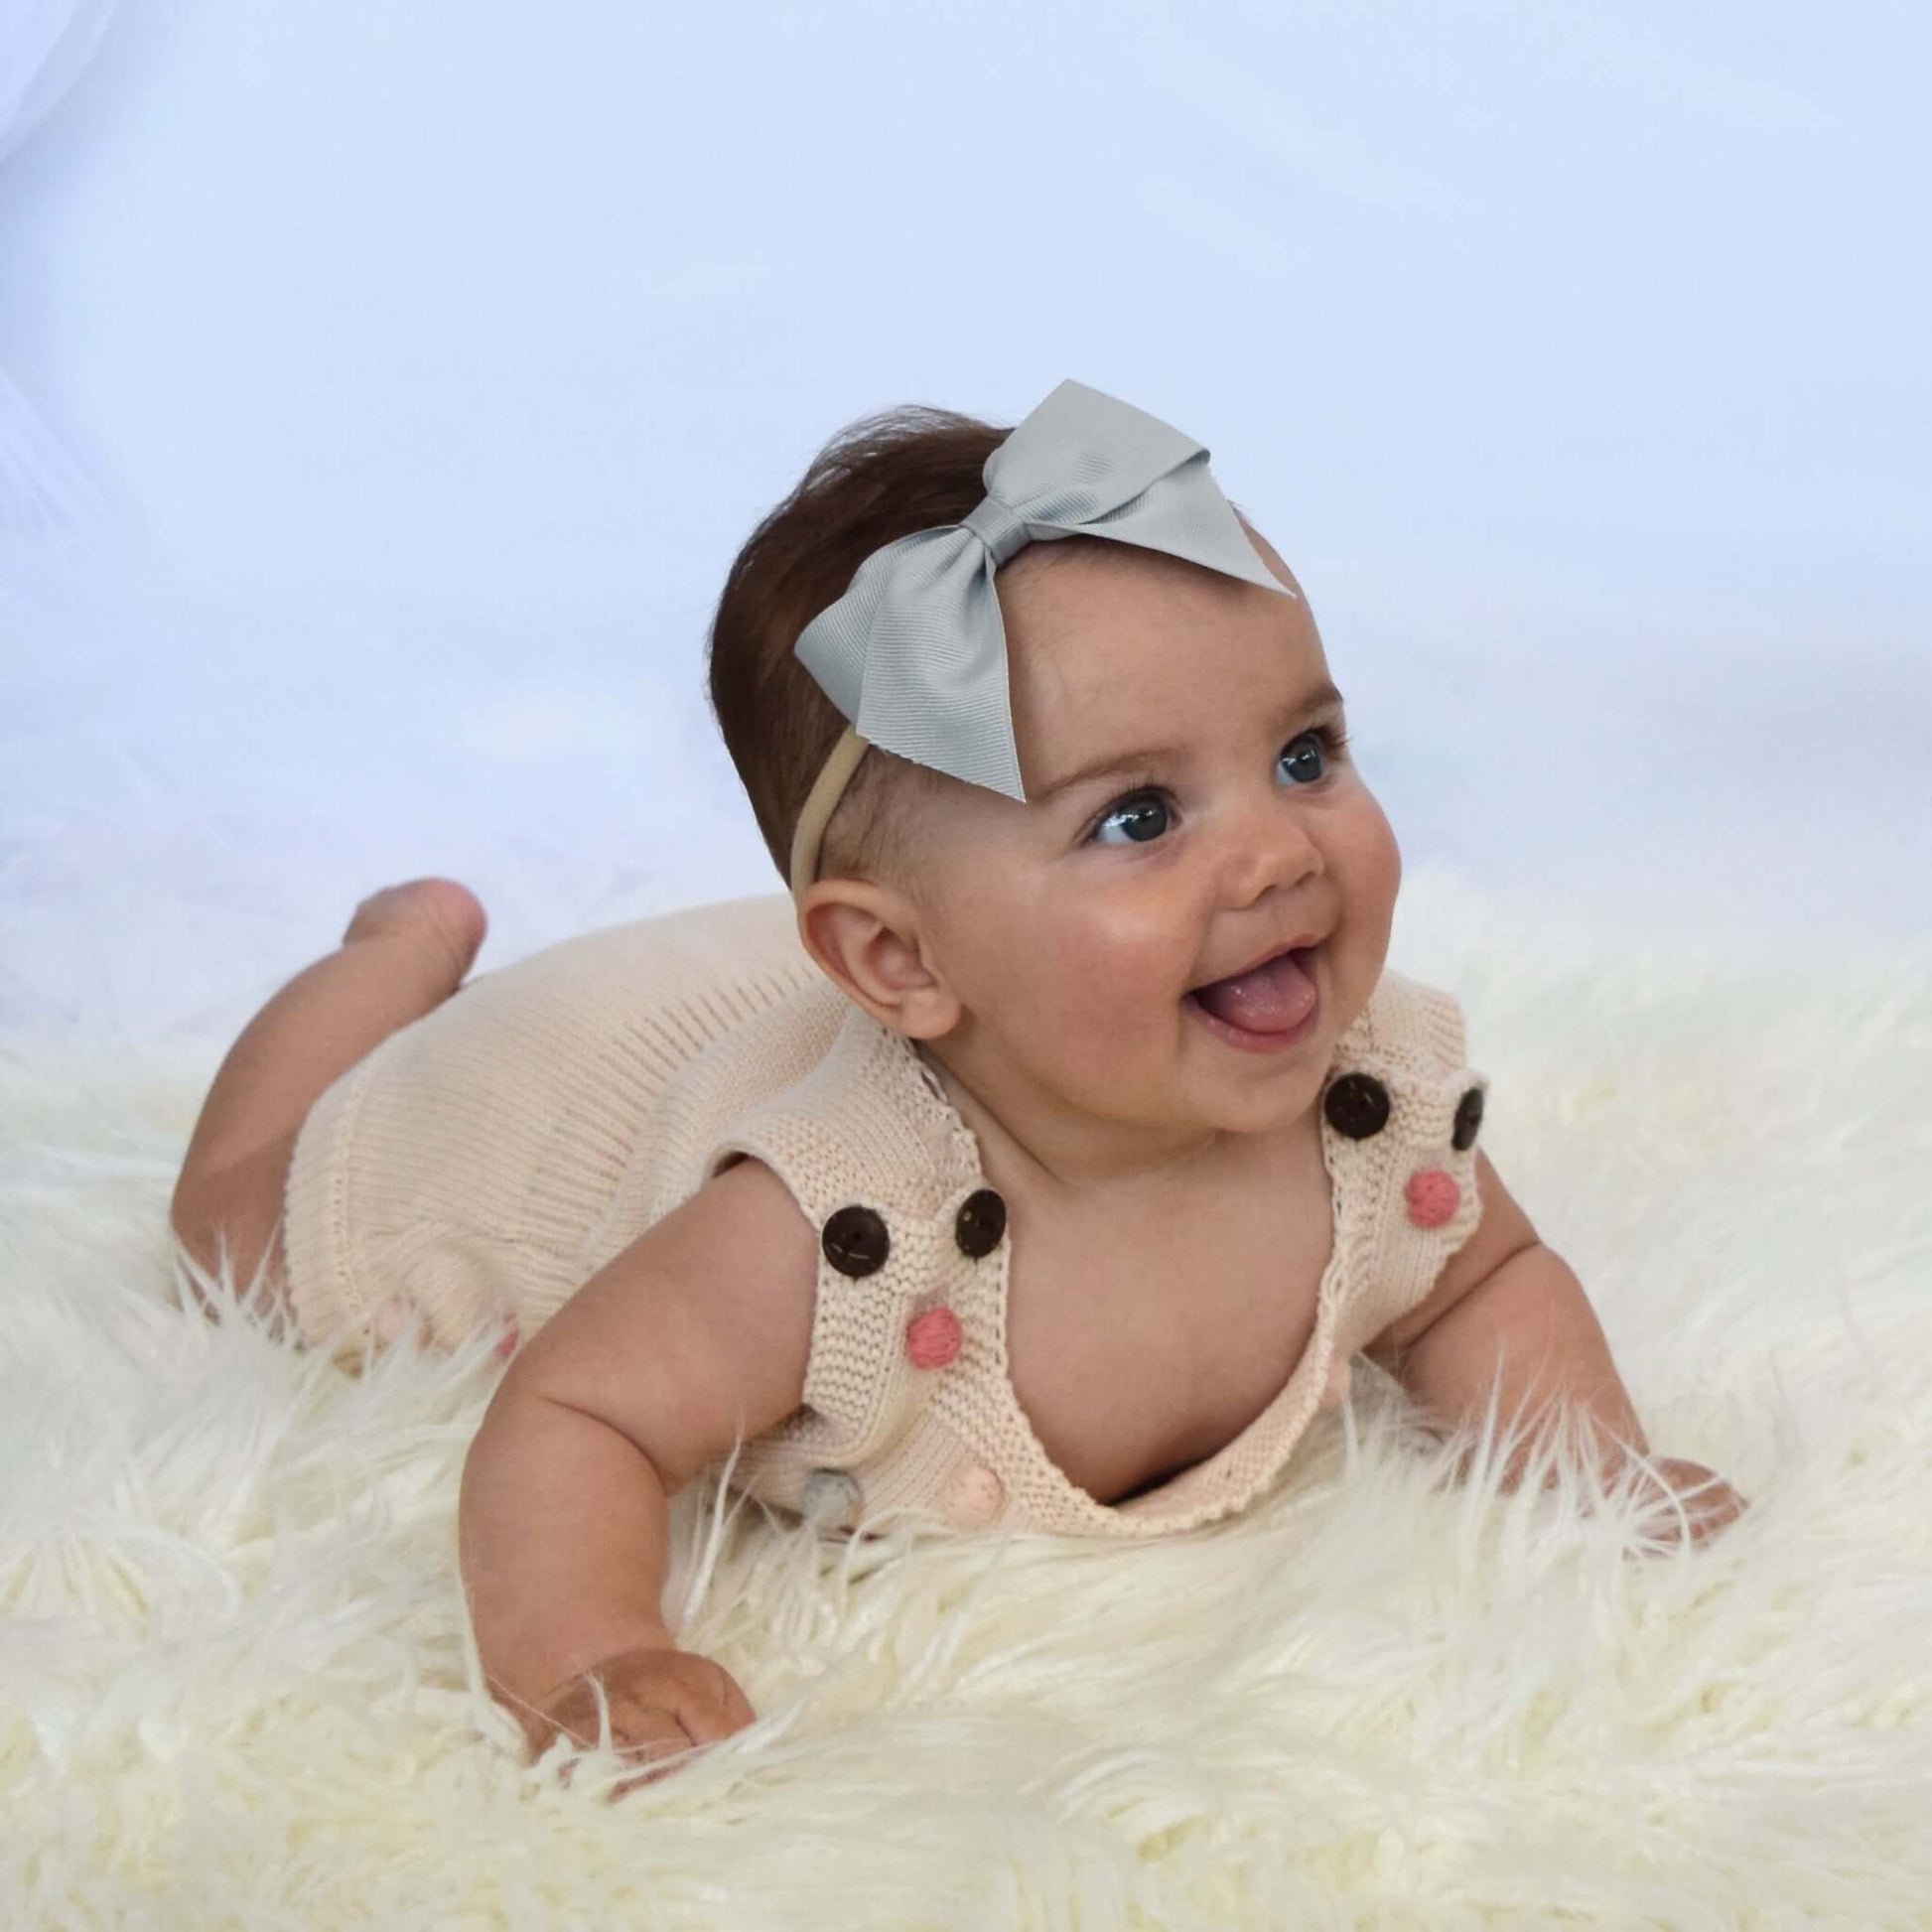 Baby wearing a gray 4 inch grosgrain bow headband, smiling while lying on fur rug, dressed in a cream knitted outfit with cute pom pom details.